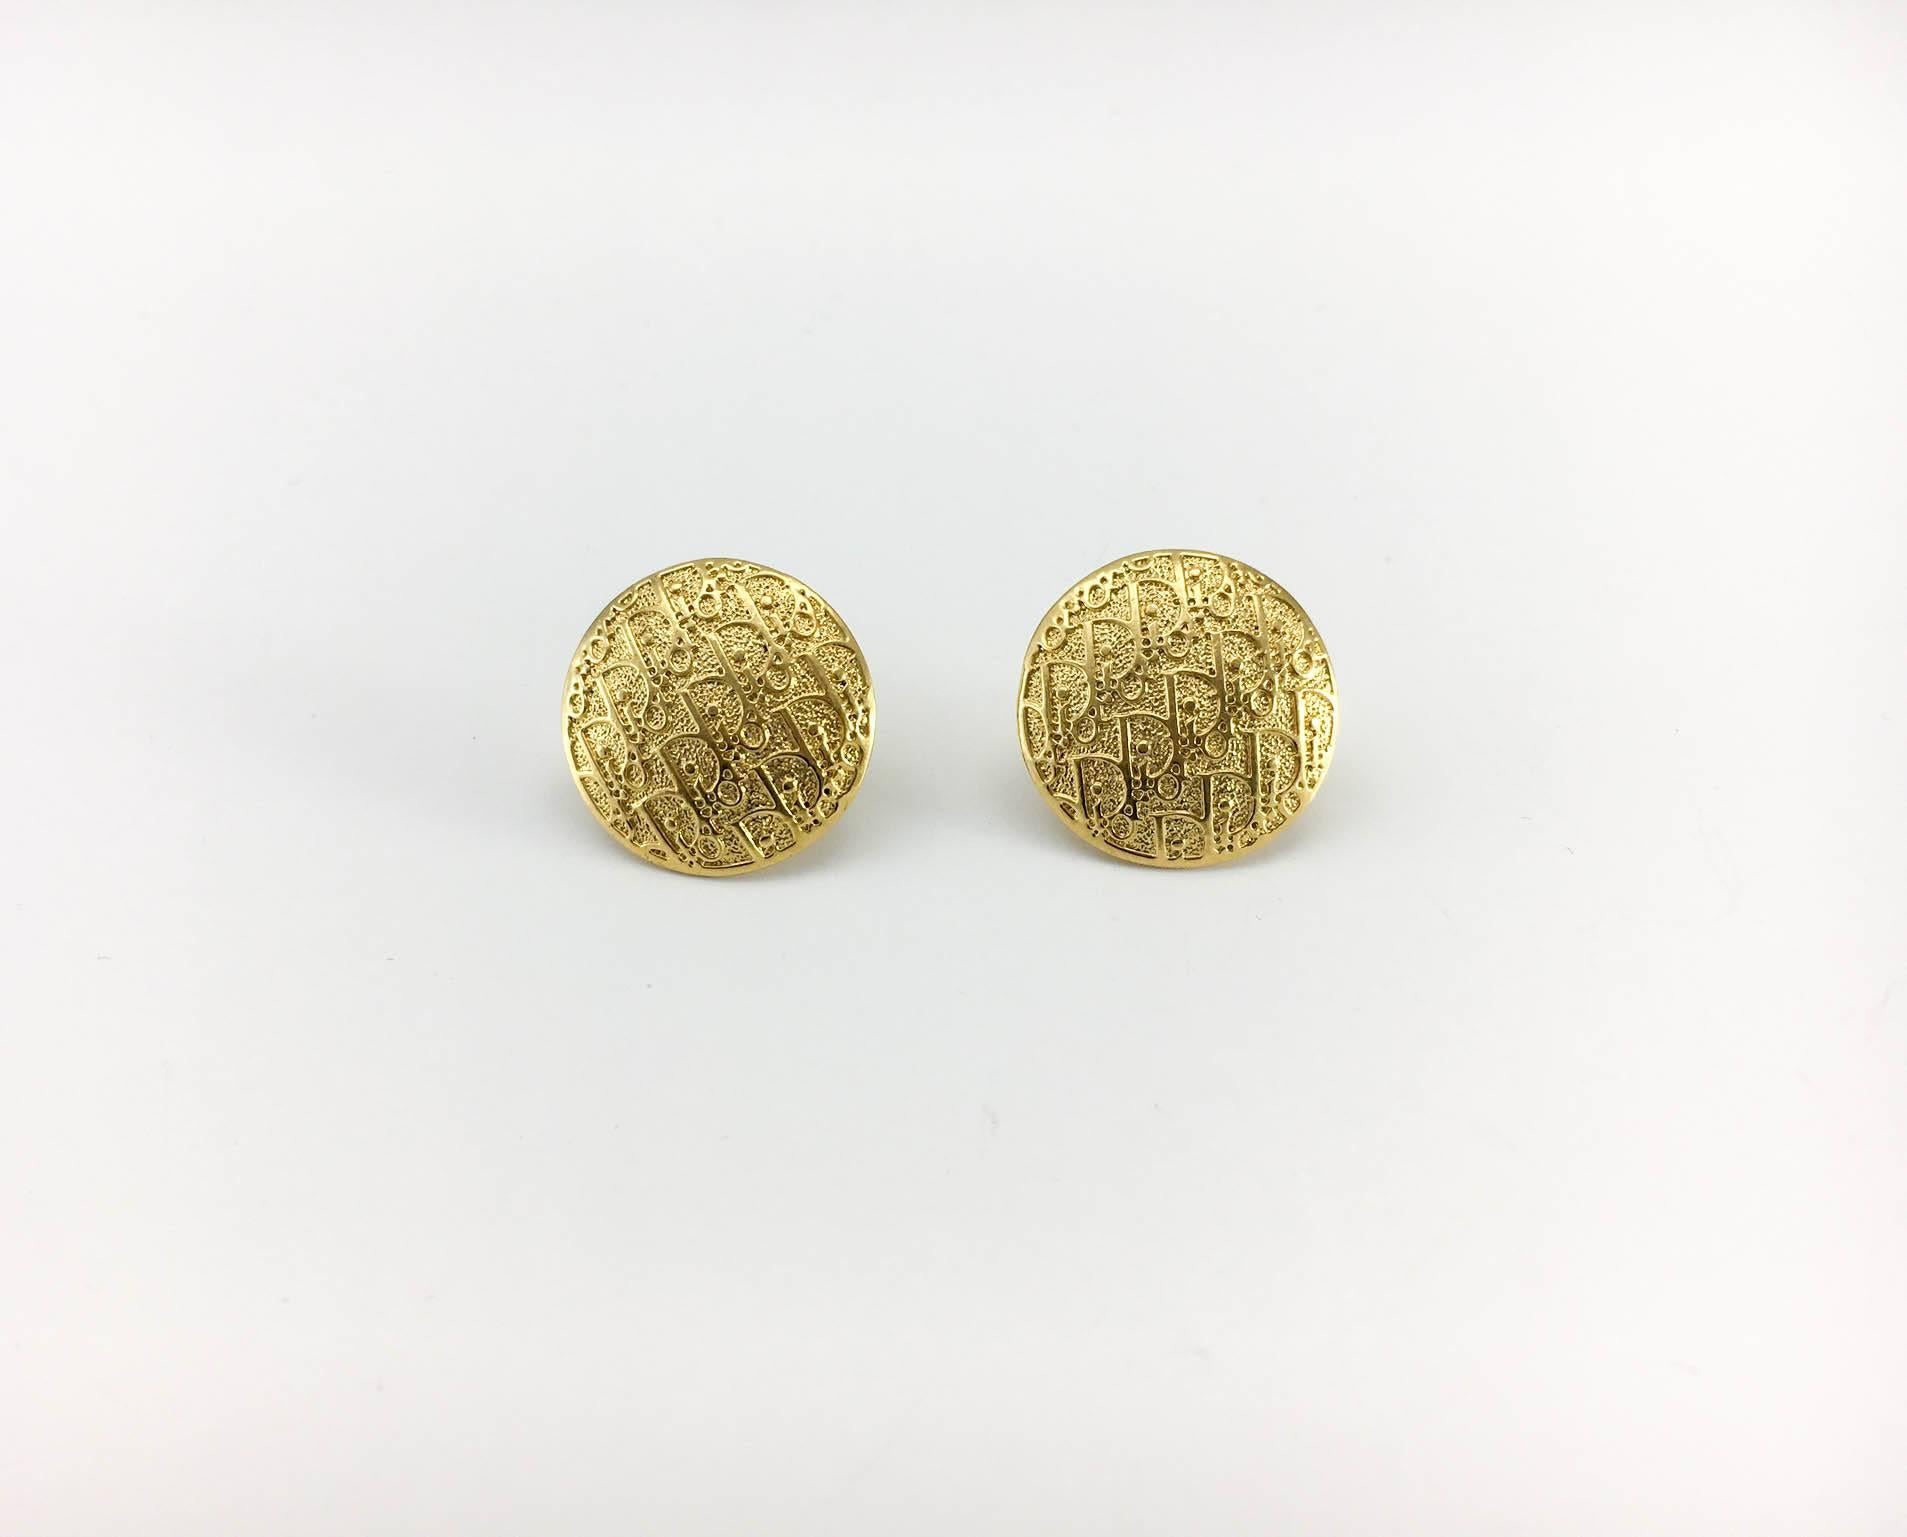 Very stylish trotter earrings by Dior. These stud earrings are made of gold-tone medallions with a repetitive pattern of the Dior logo. Dior singed on the back. In pristine condition, these earrings will add a touch of understated style and glamour